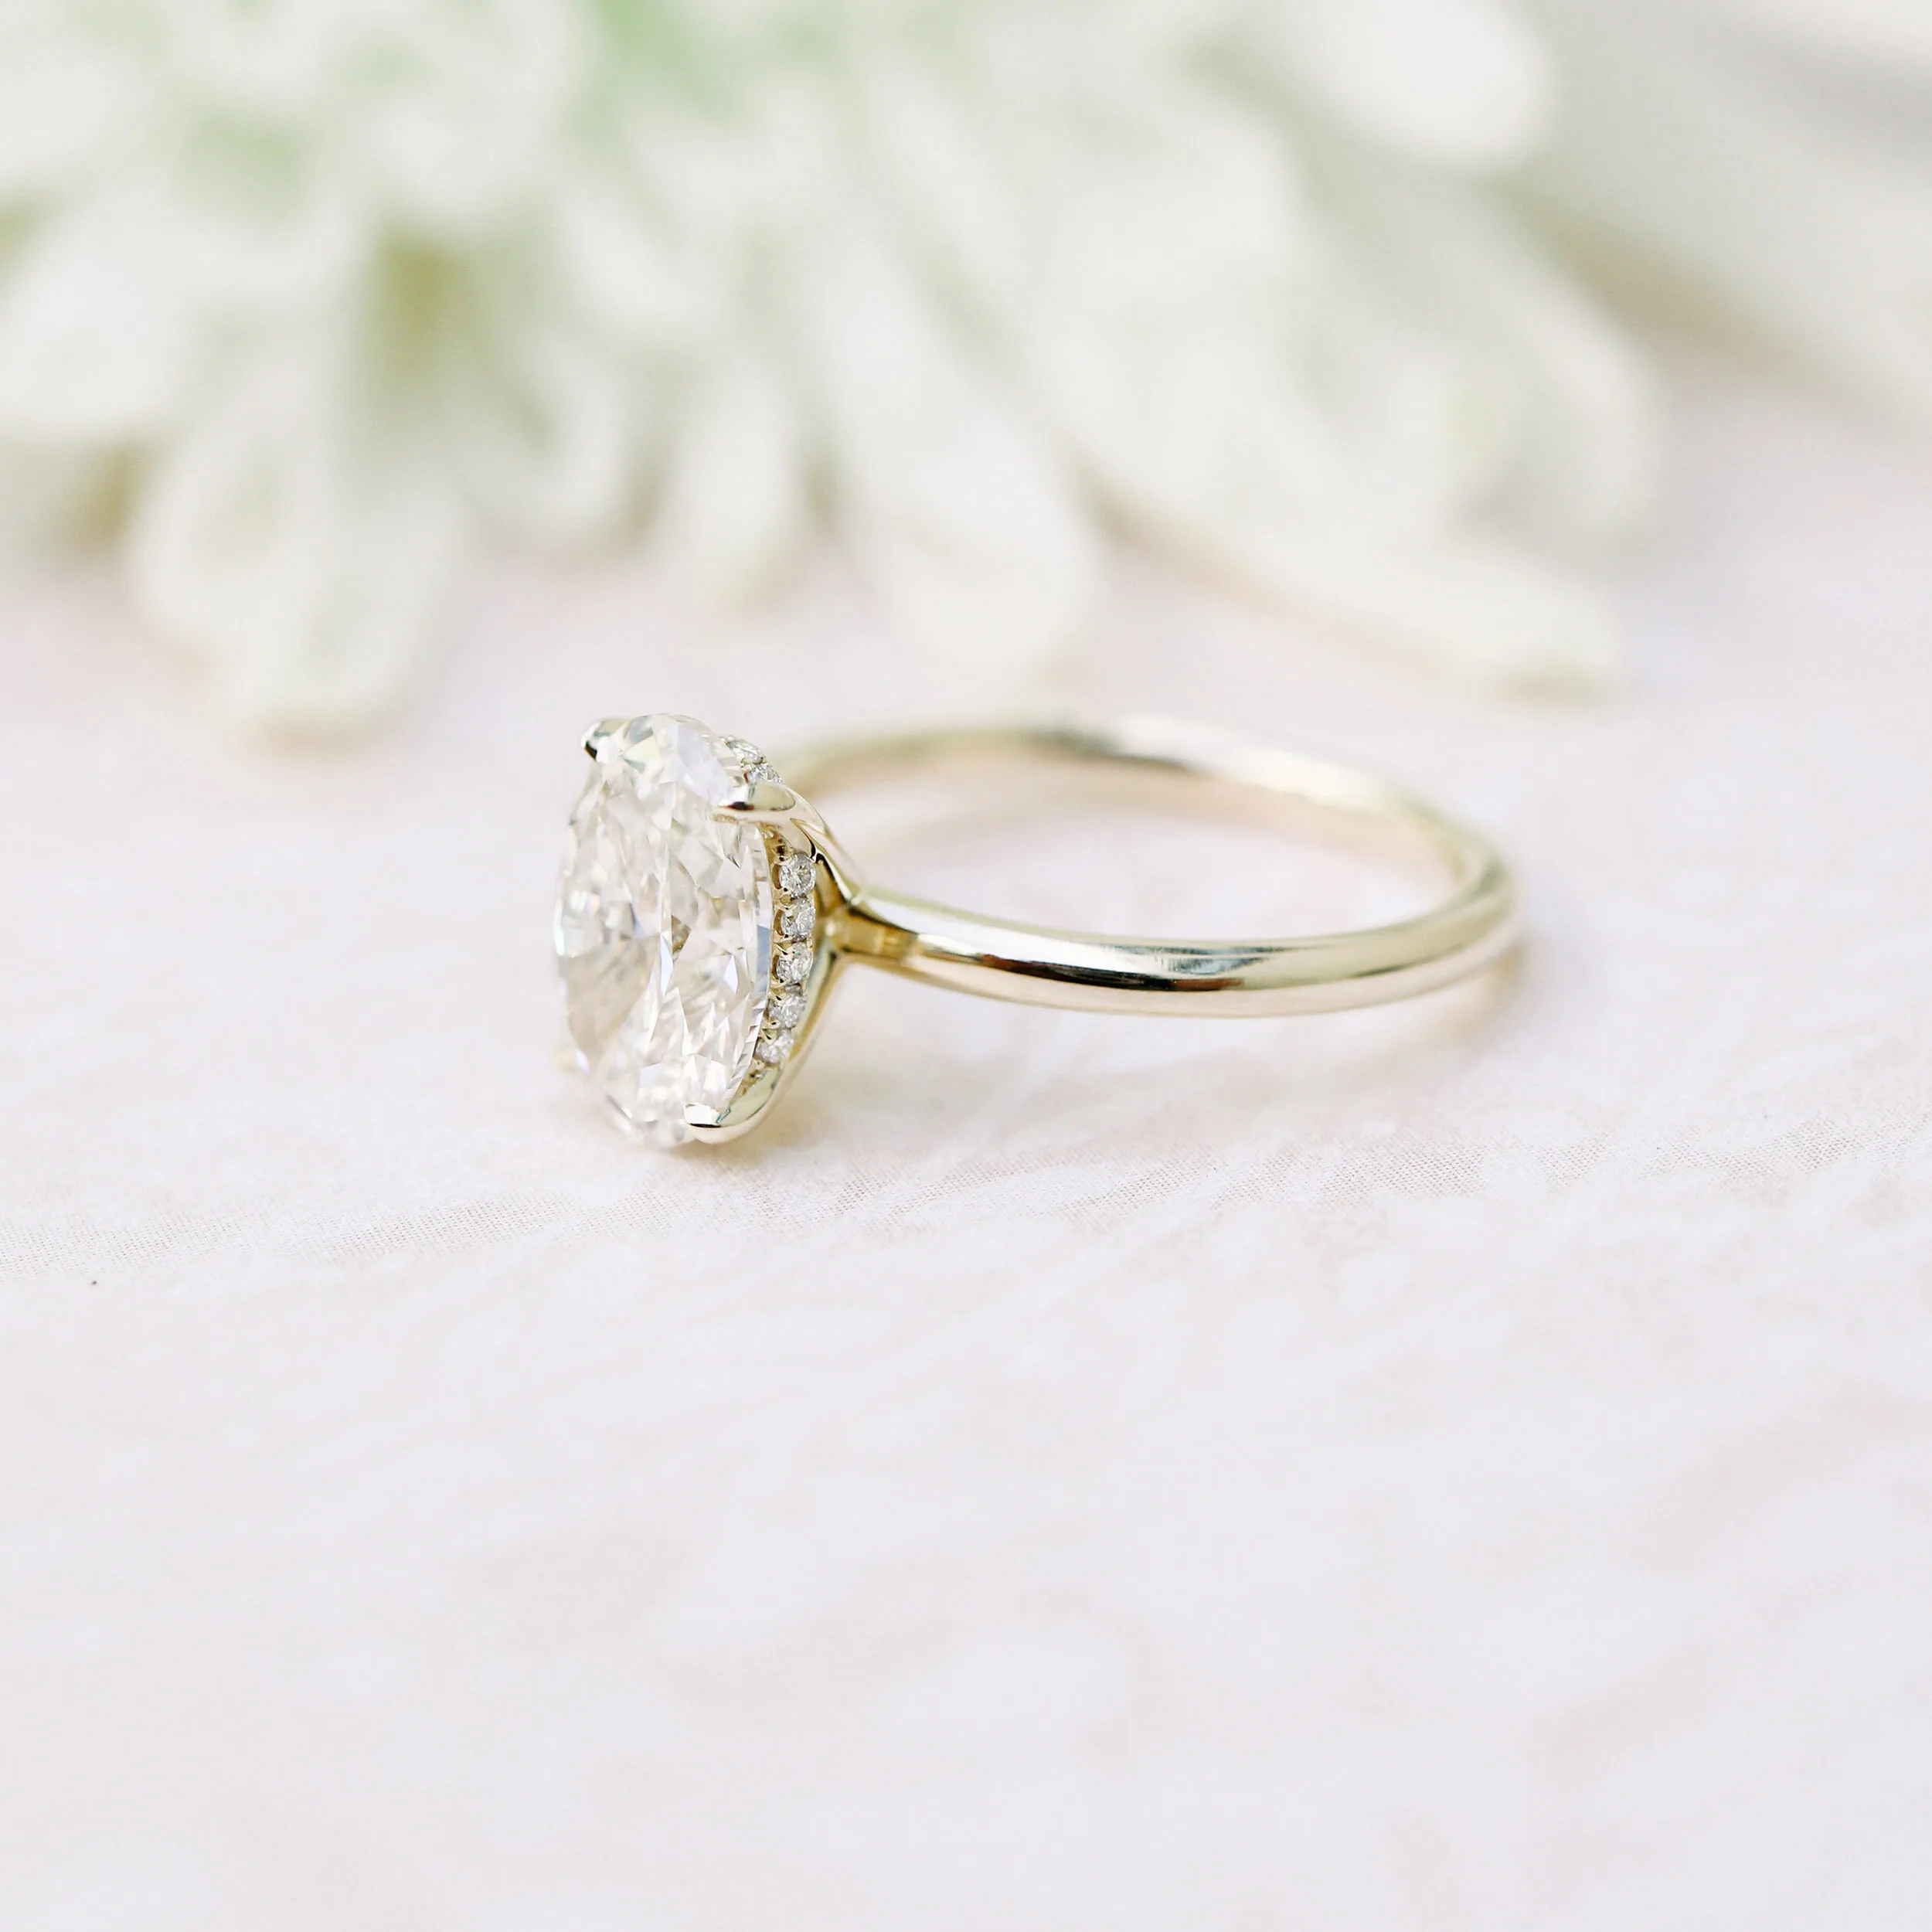 14k Yellow Gold 2 Carat Oval Solitaire Engagement Ring Featuring Lab Diamonds Ada Diamonds Design Number 143 Artistic Shot